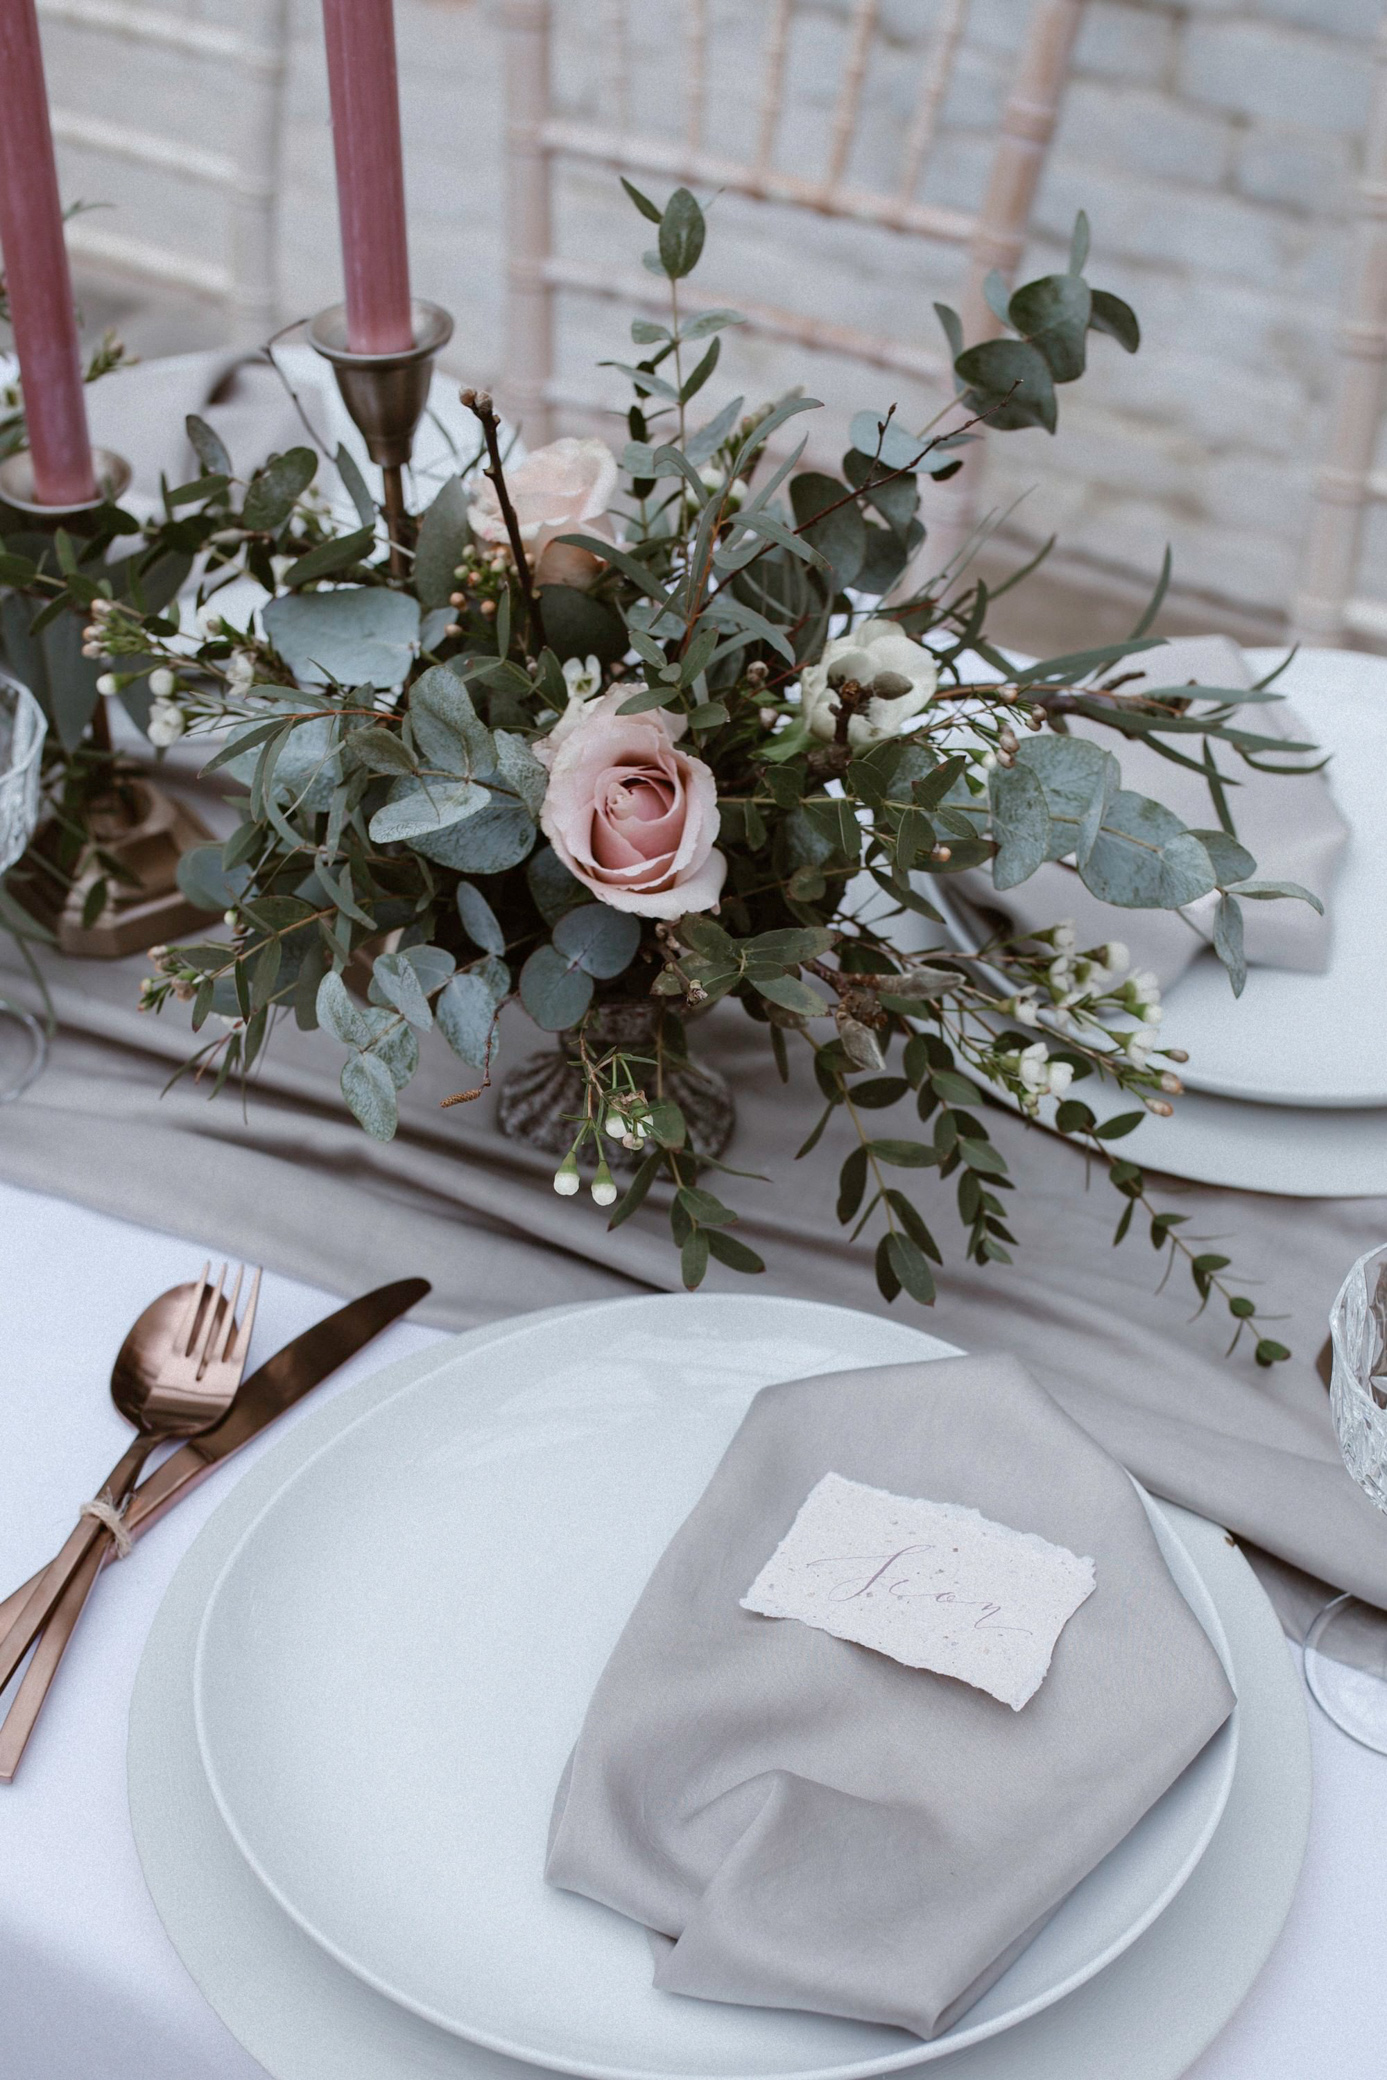 Wedding table with eucalyptus and pink roses, and dusky pink candles. White plates are styled simply with a grey napkin and calligraphy place name card